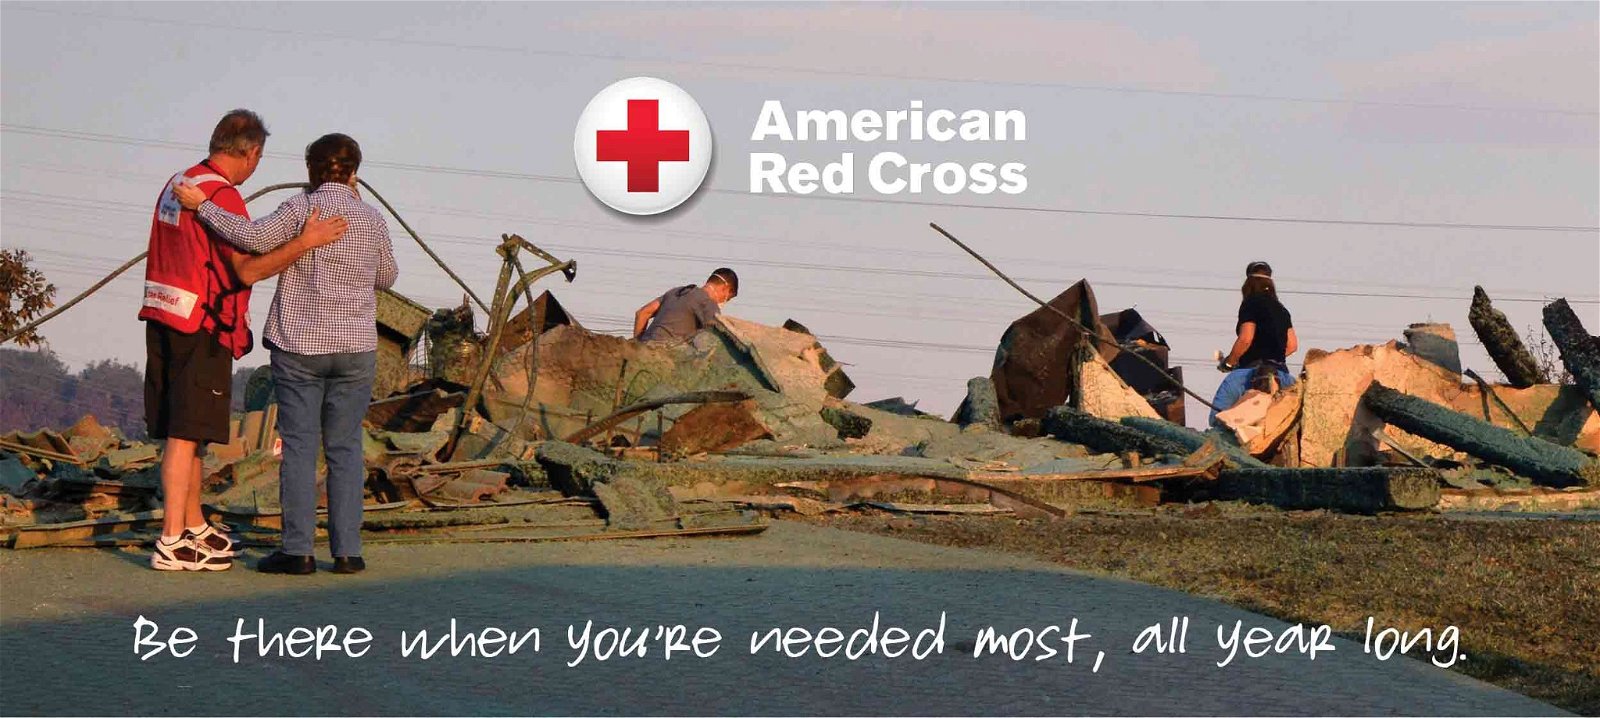 American Red Cross - Be there when you're needed most, all year long.